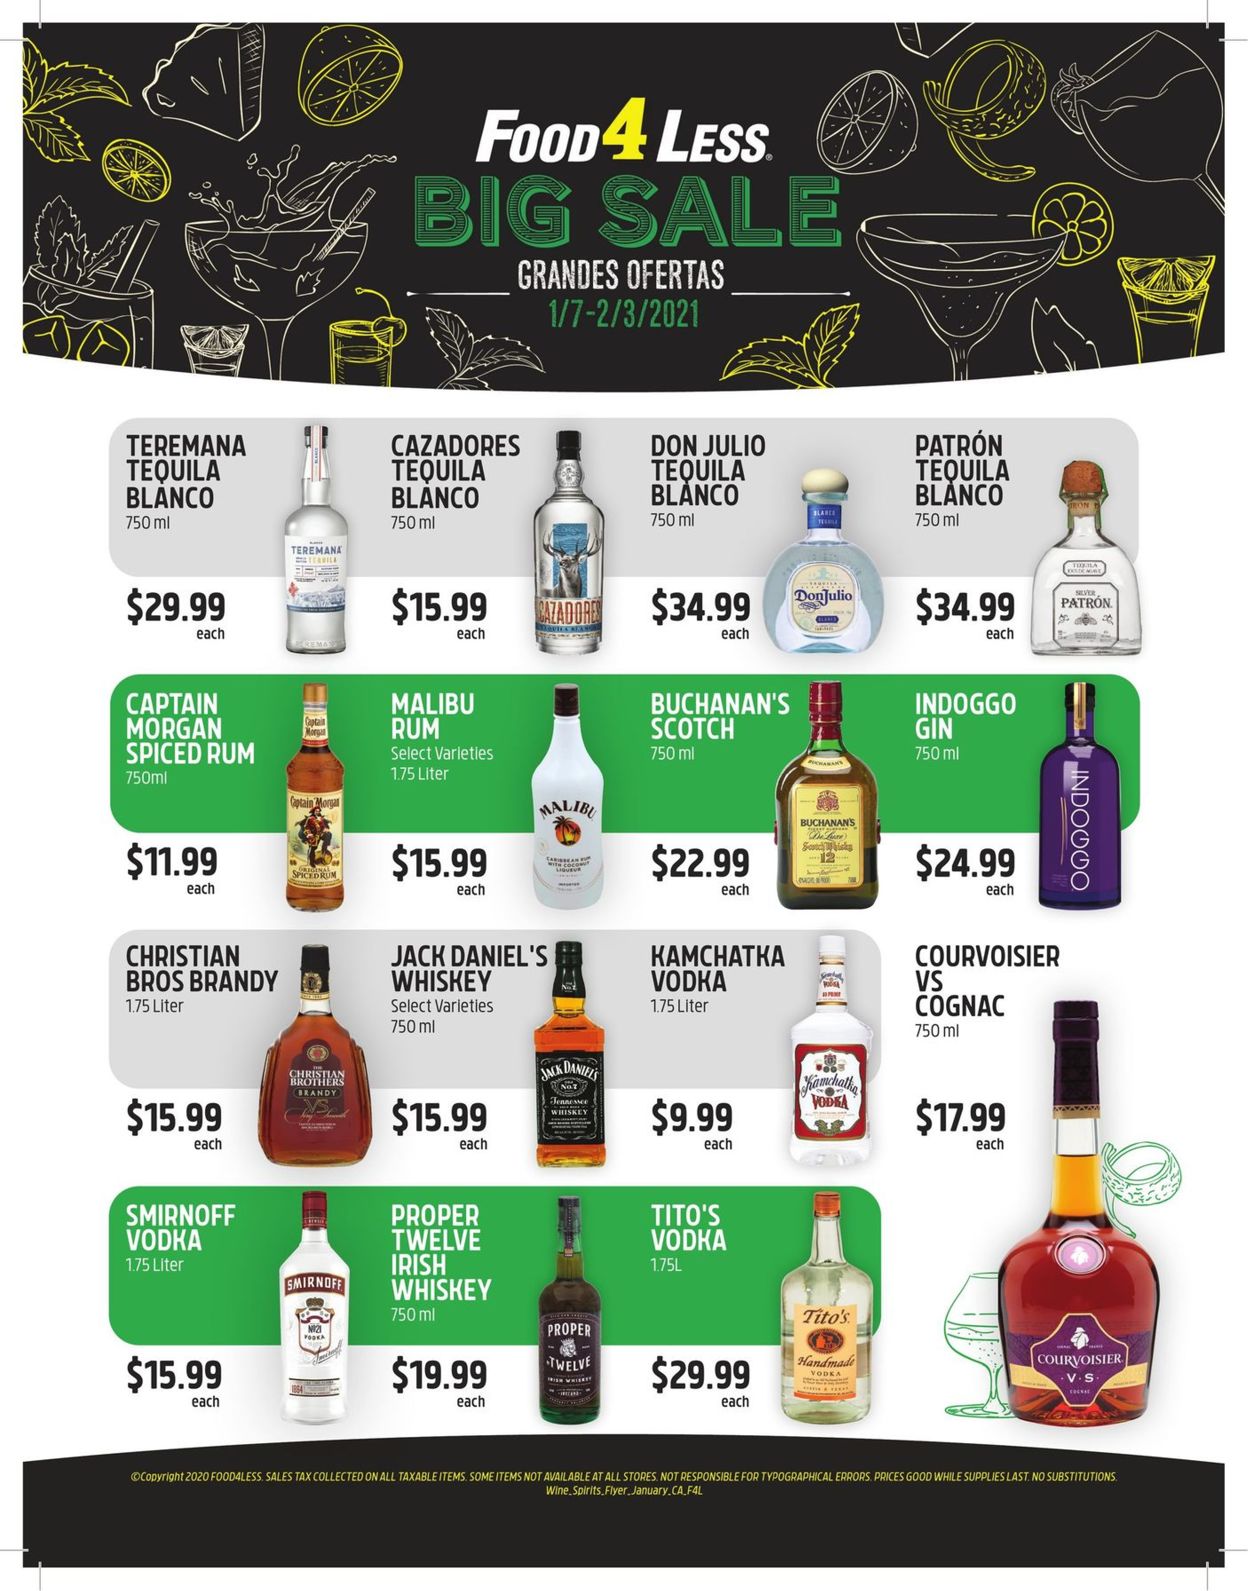 Catalogue Food 4 Less Big Sale 2021 from 01/07/2021